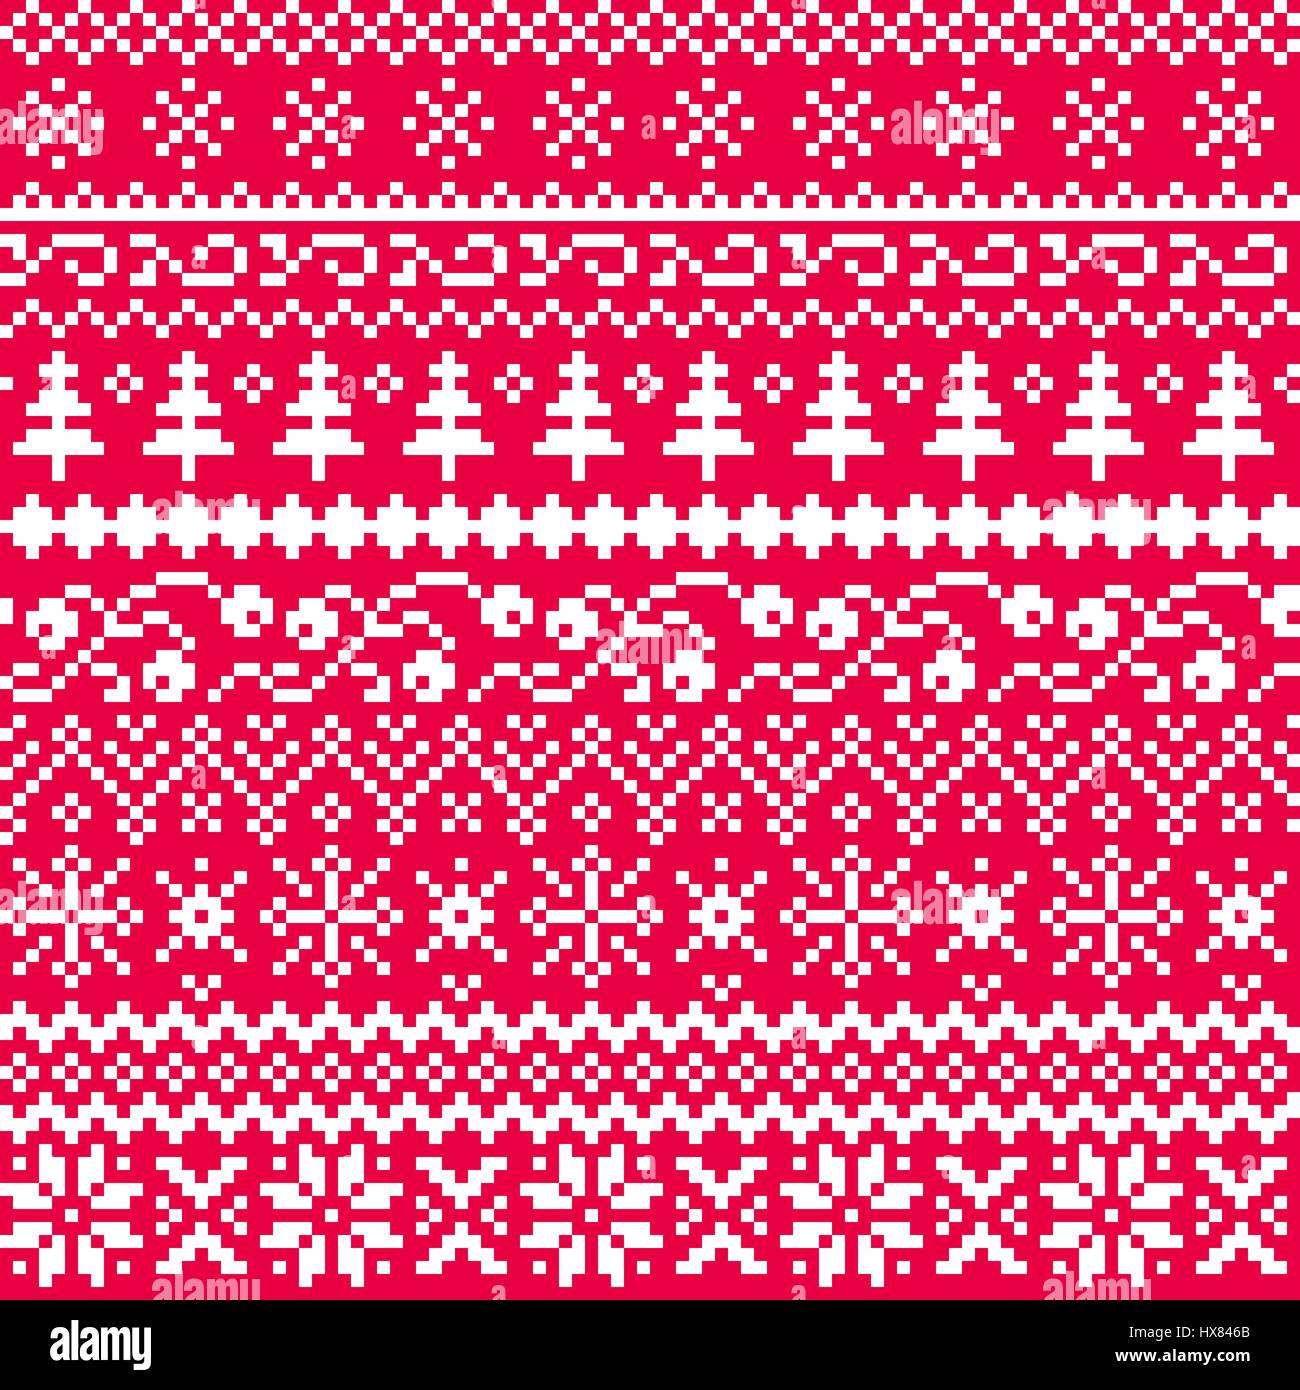 Christmas seamless vector pattern with ethnic motifs in white on a red background. New Year. Pixel. Stock Vector